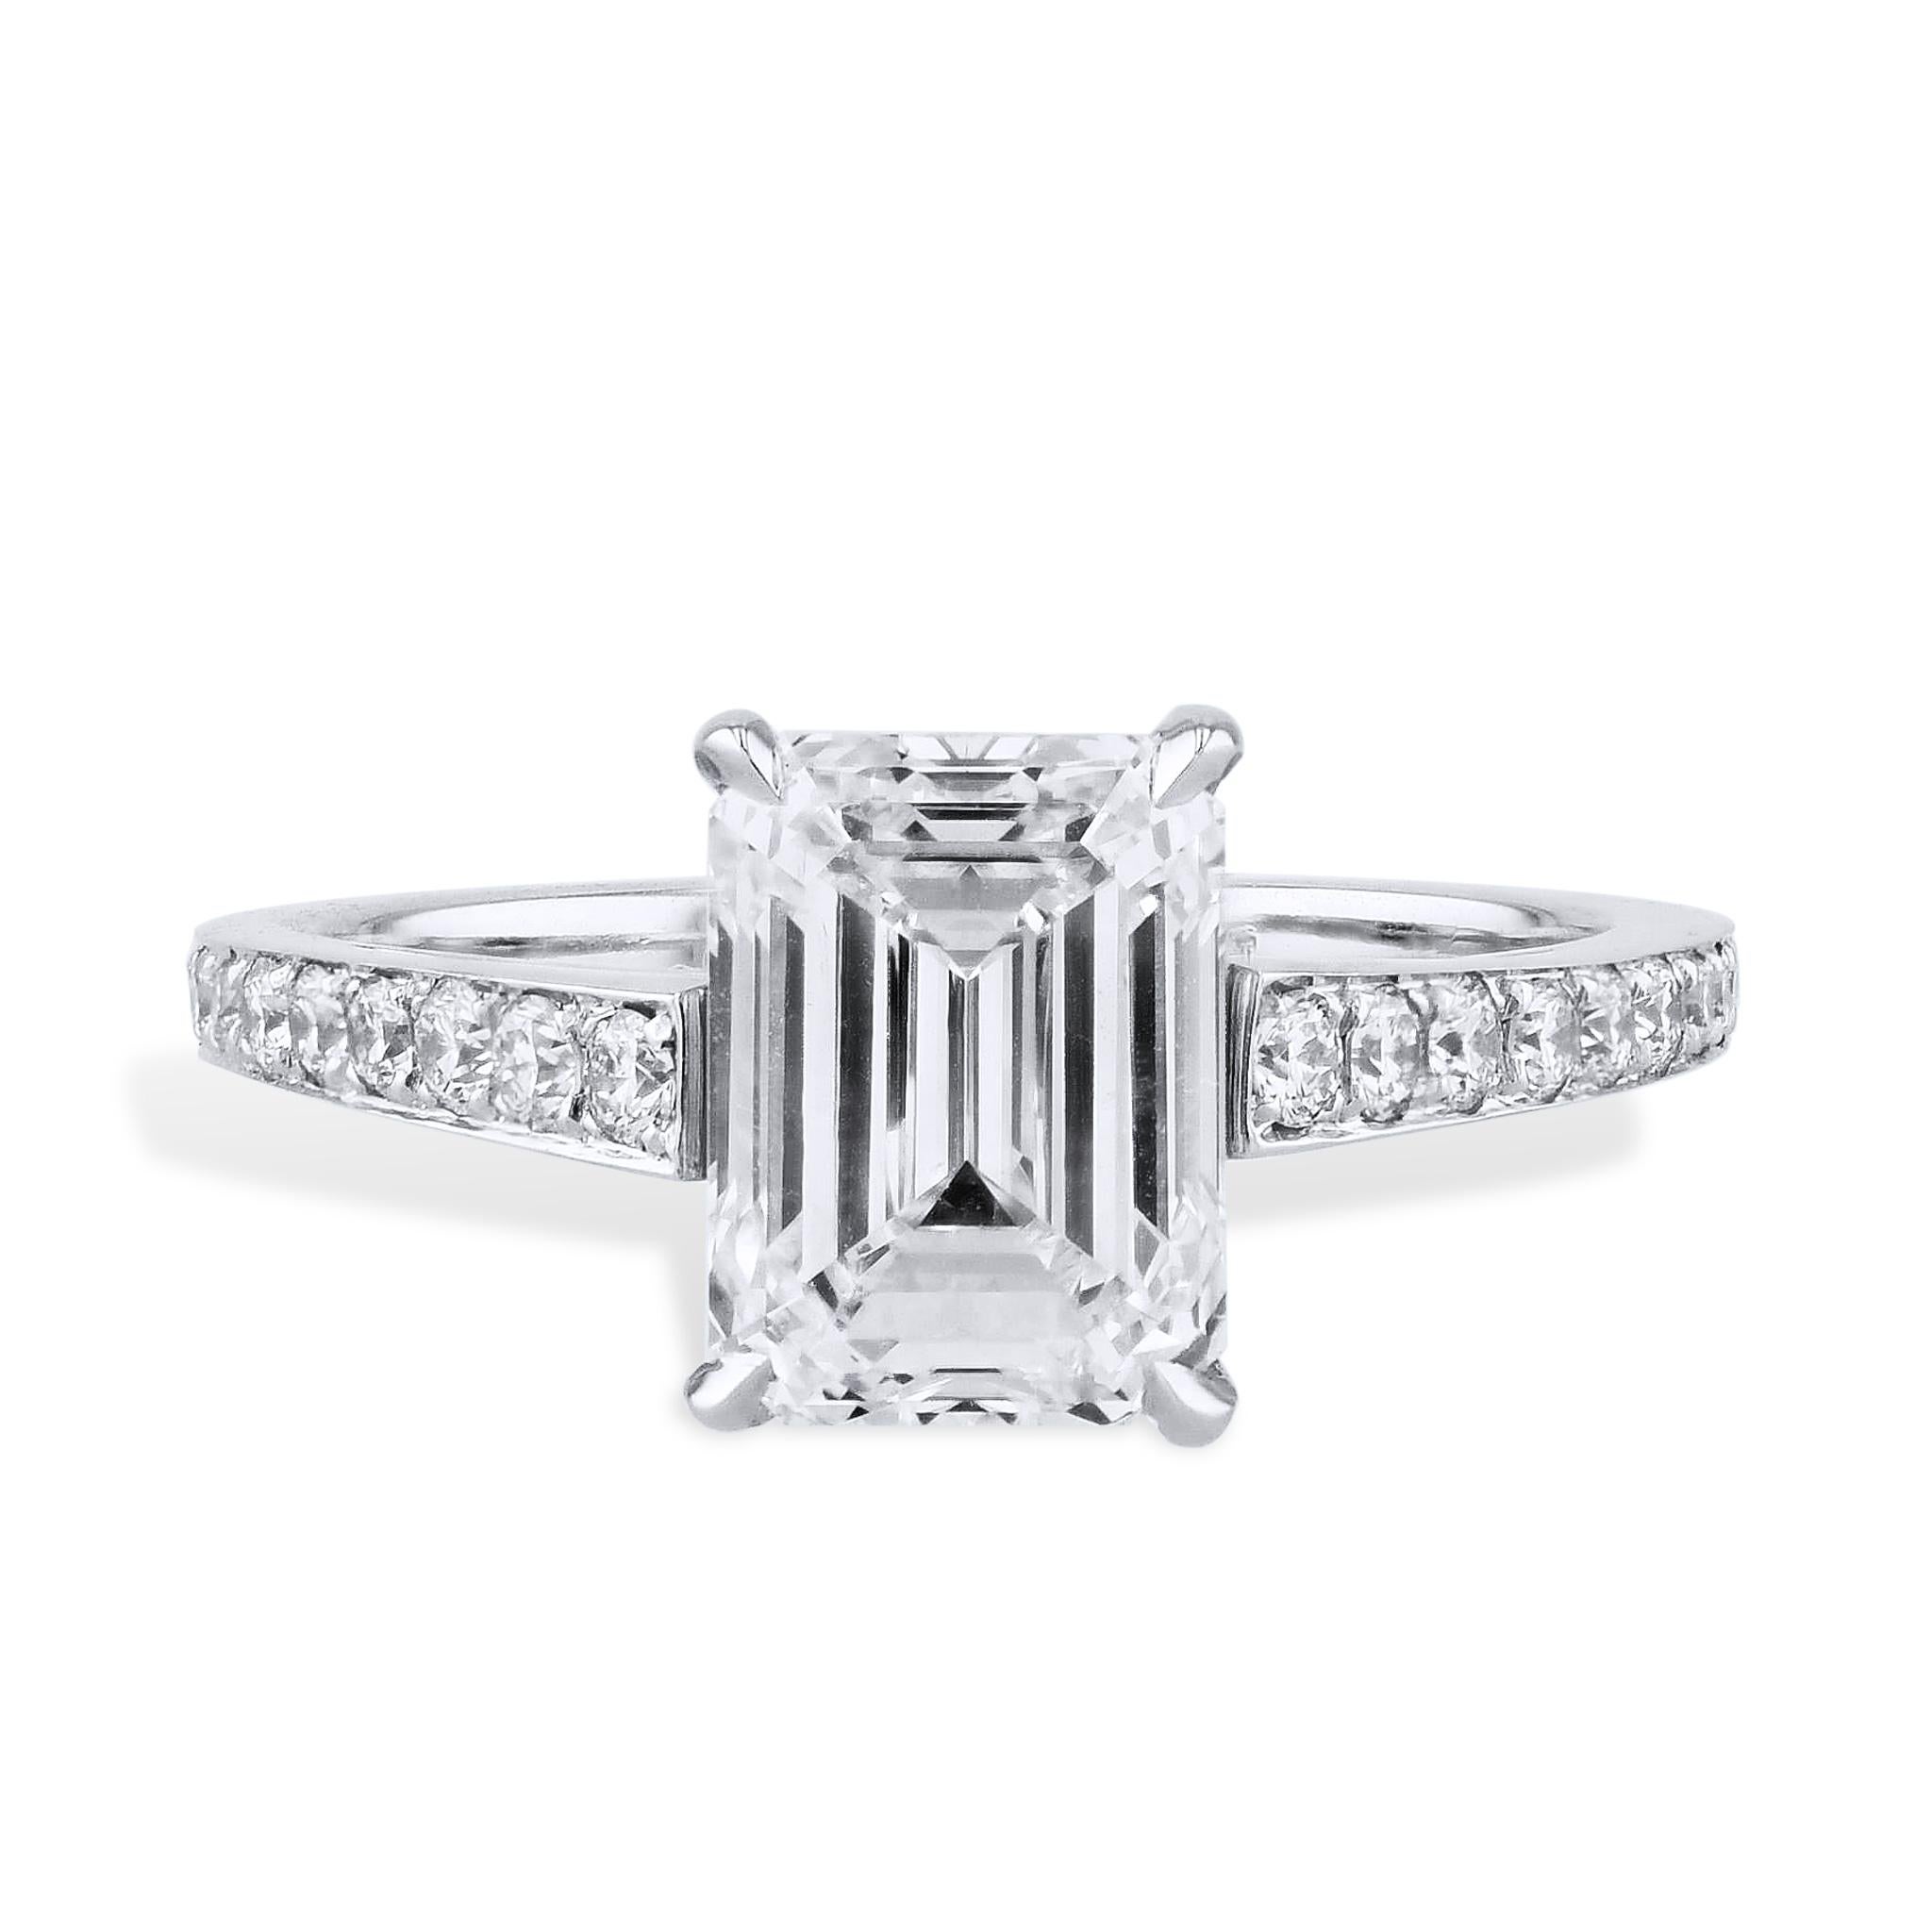 This mesmerizing emerald cut diamond platinum engagement ring features a stunning 2.02 carat center stone that is surrounded by and additional 18 dazzling diamonds that total 0.20 carats.

This is a handmade ring and is currently a size 4.25. It can